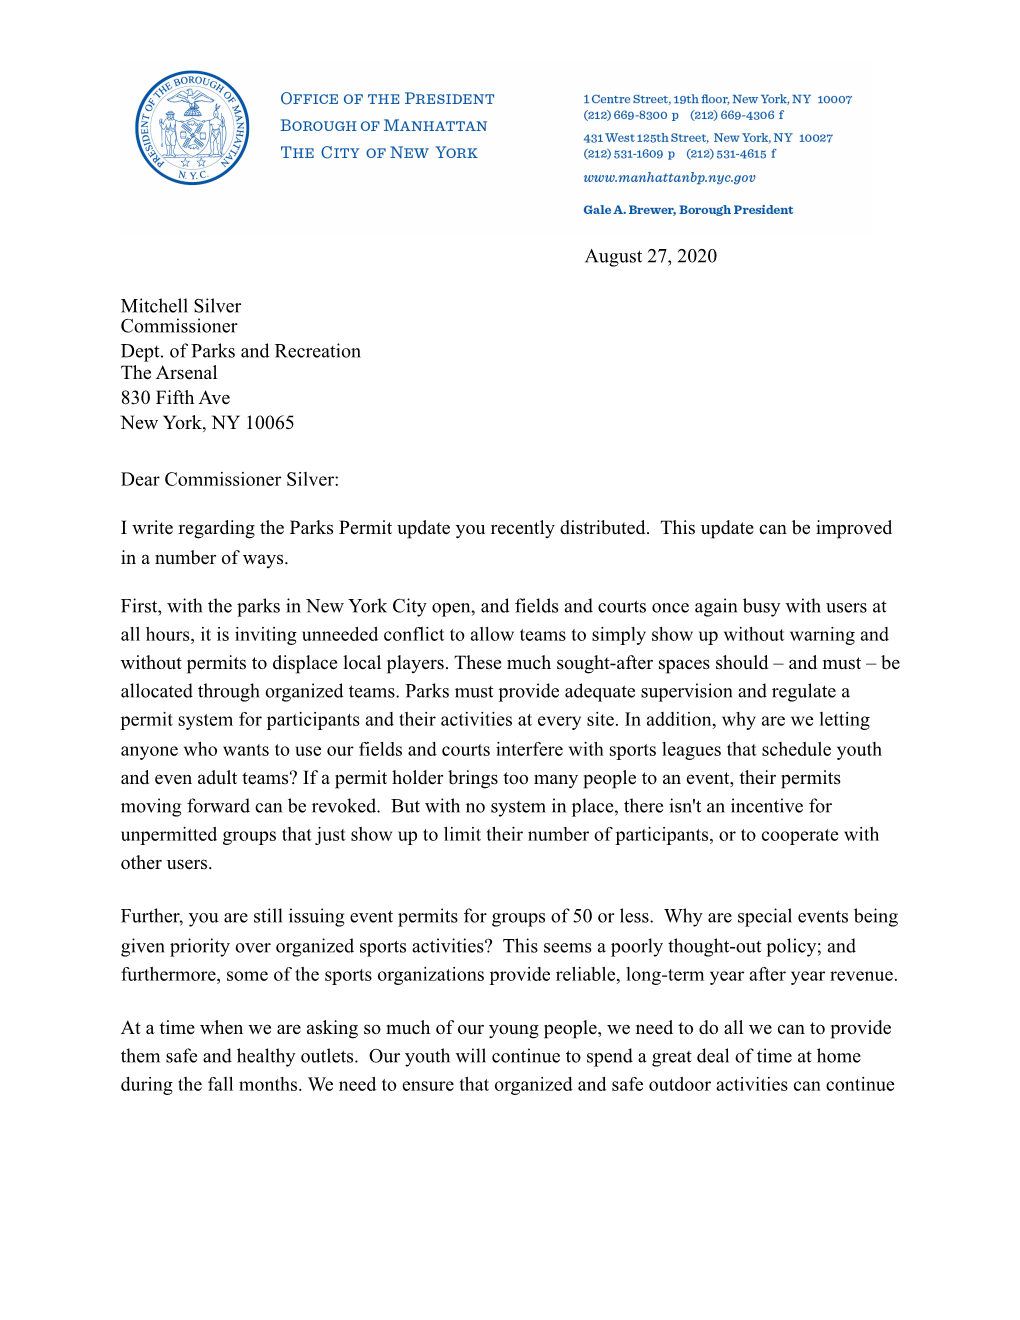 Letter to Parks Commissioner Mitchell Silver